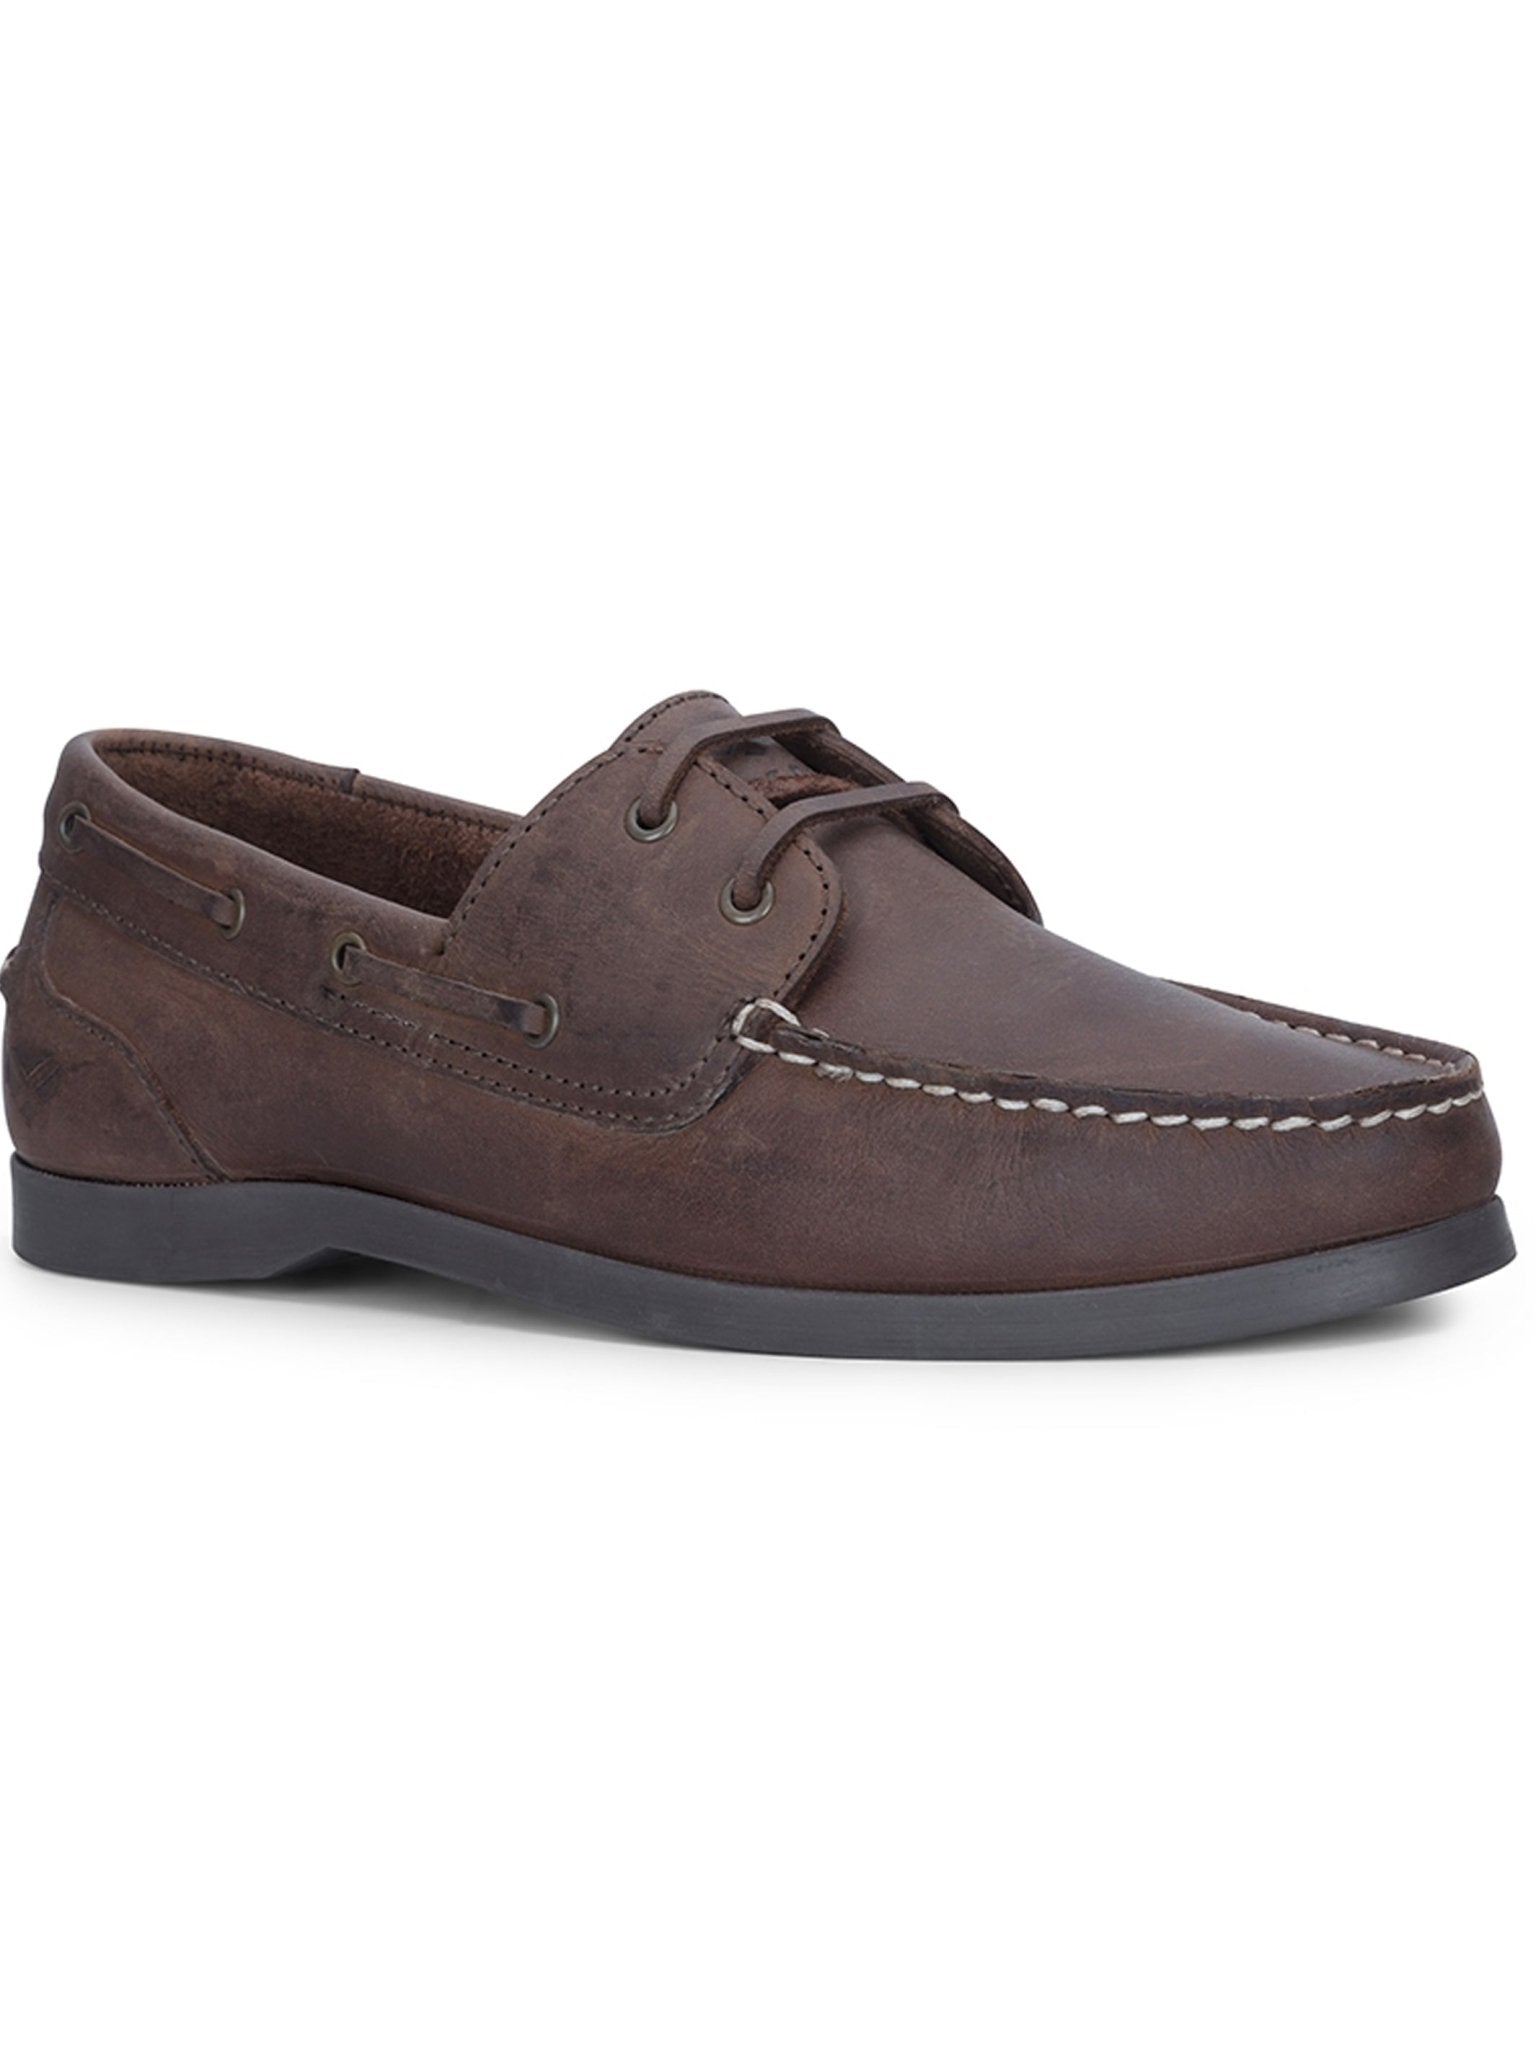 Hoggs of Fife Hoggs of Fife - Boat Shoe / Deck shoe With Sipe sole hand stitched leather shoe - Mull deck shoe Shoes